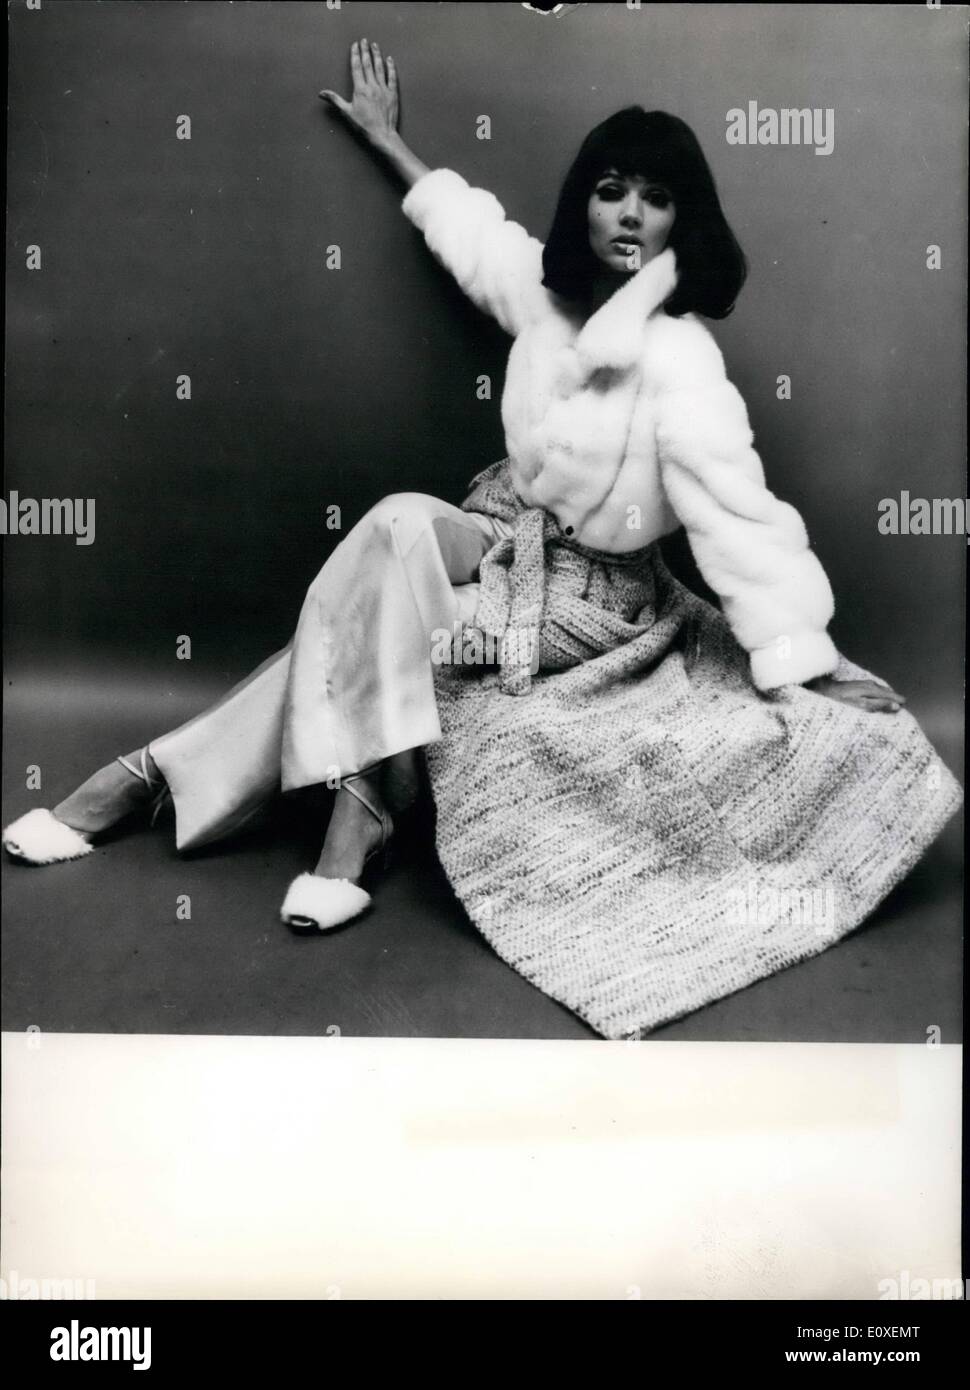 Aug. 08, 1966 - White Mink and Mohair Cloth for 'De Luxe' Host Revillon has designed this white mink and mohair cloth ensemb Stock Photo